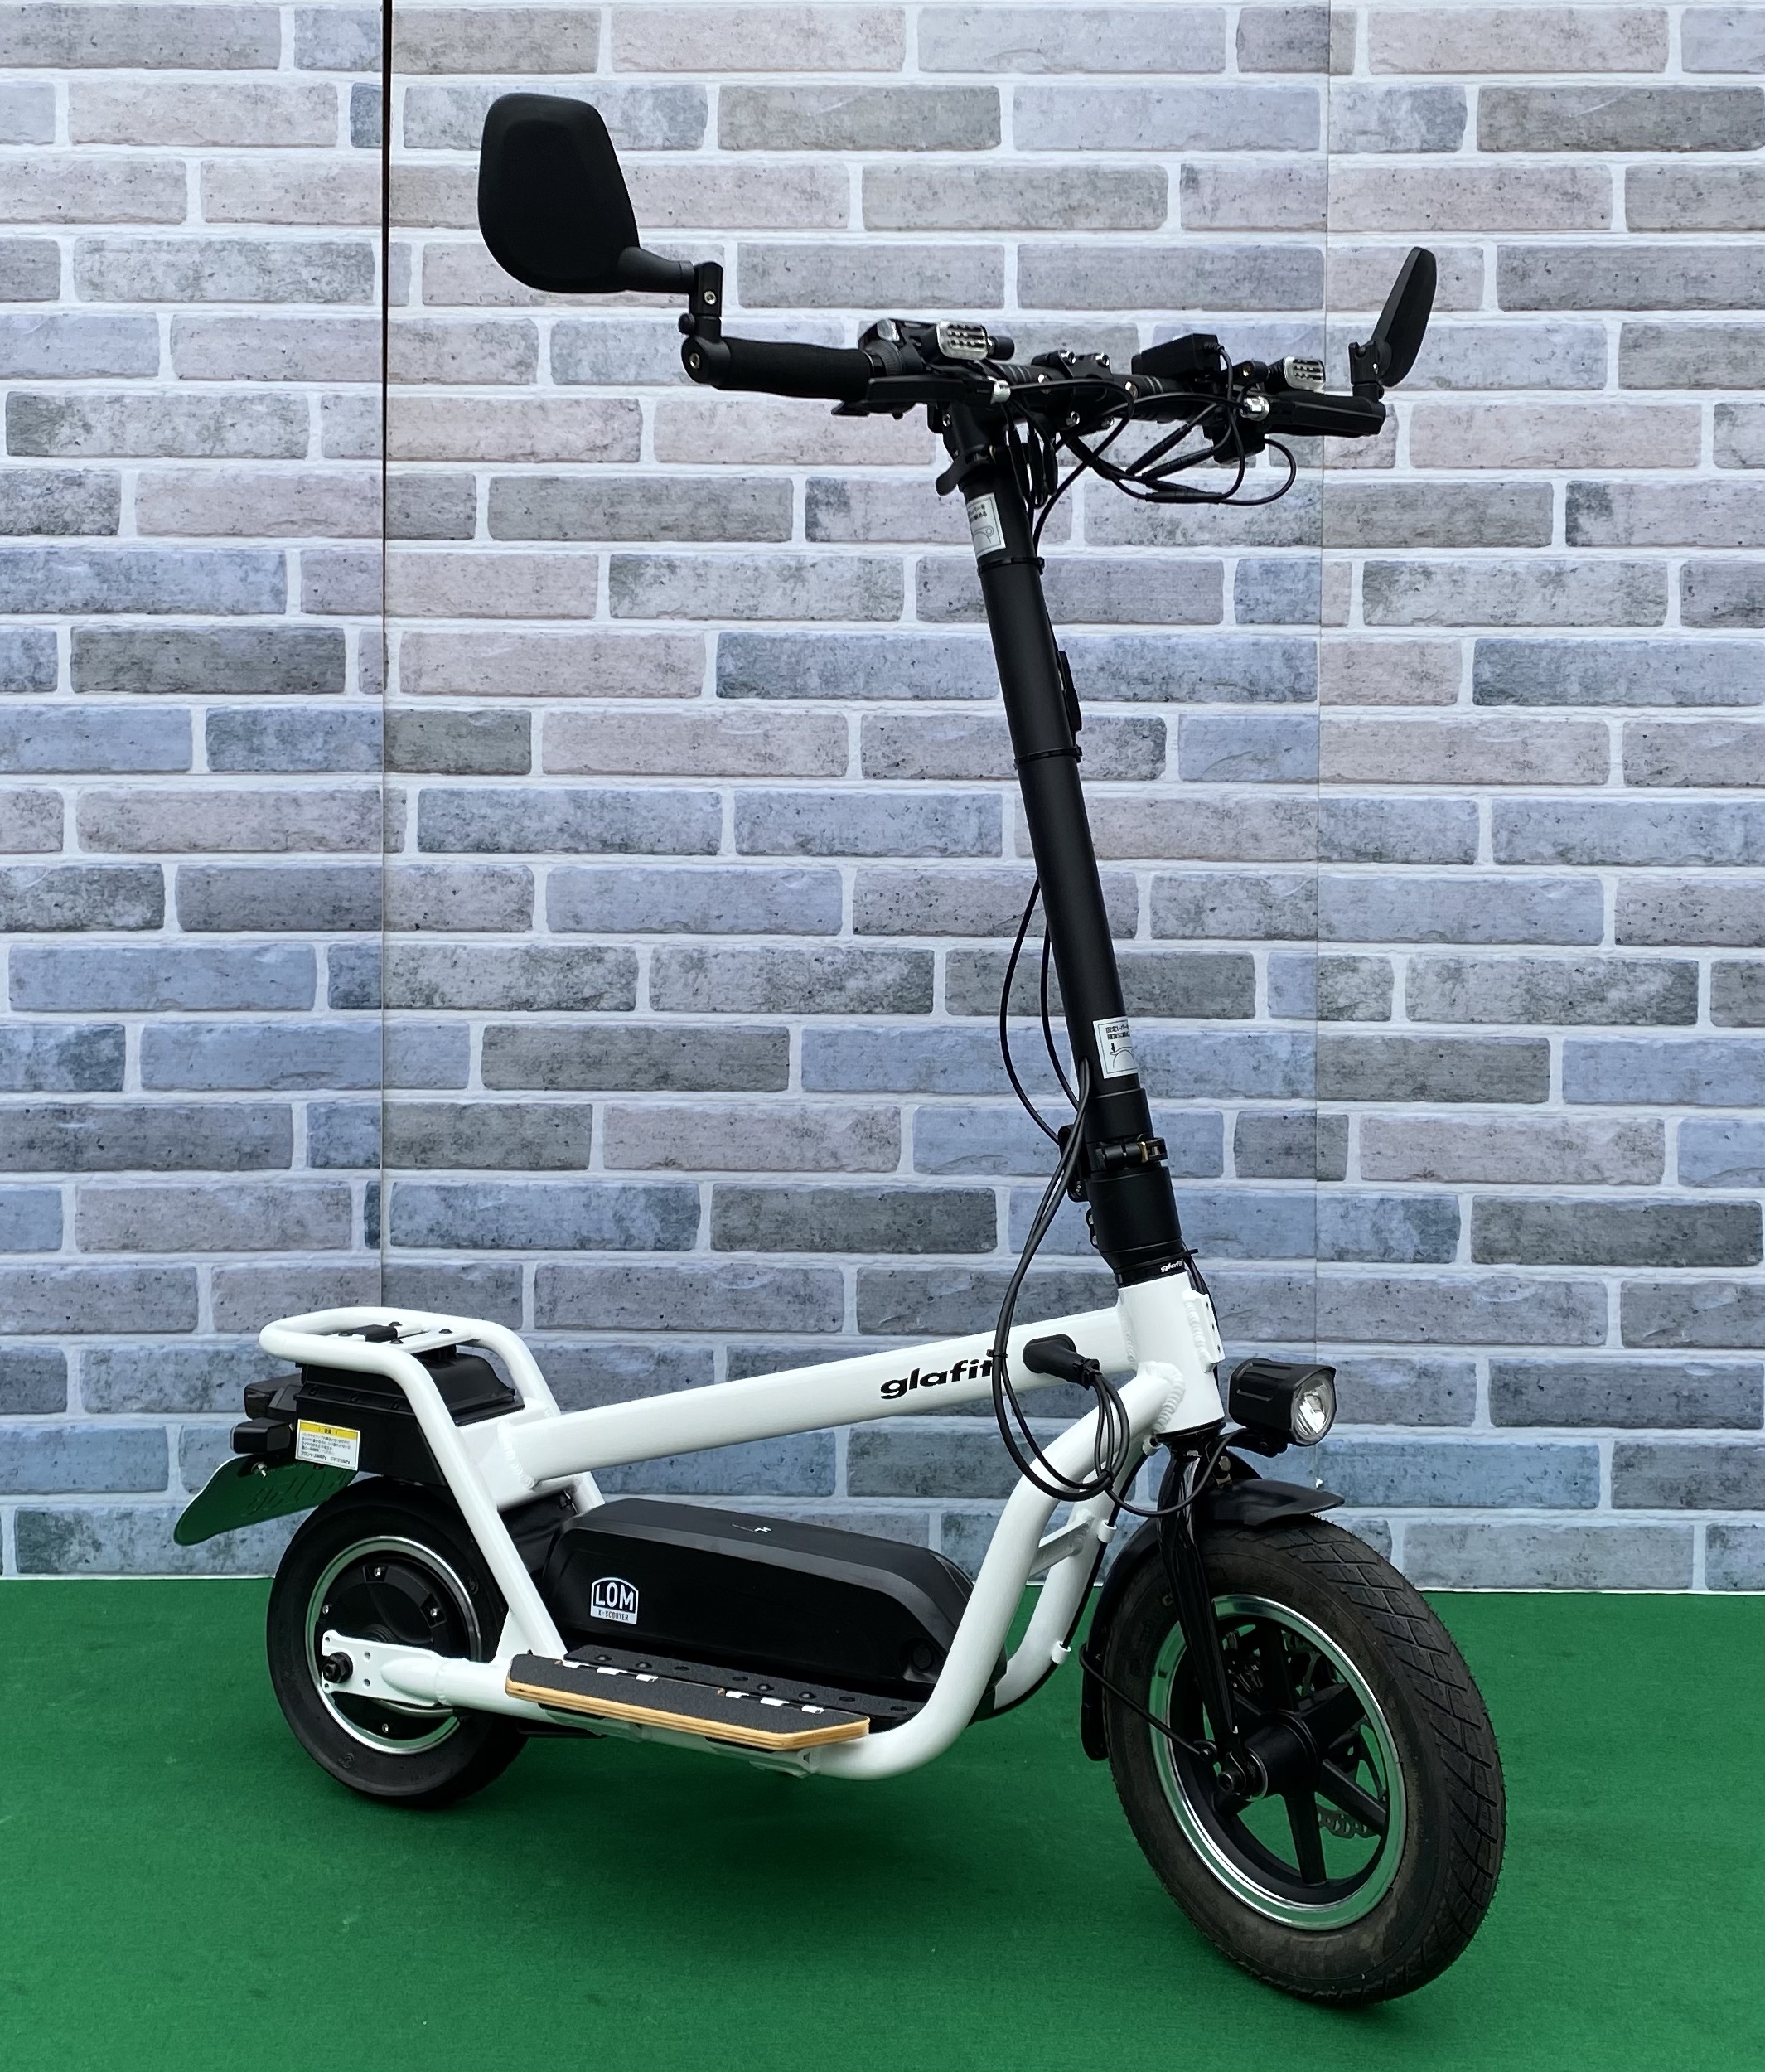 glafit X-SCOOTER LOM | 箕面市の自転車屋 |中井商会 電動アシスト 